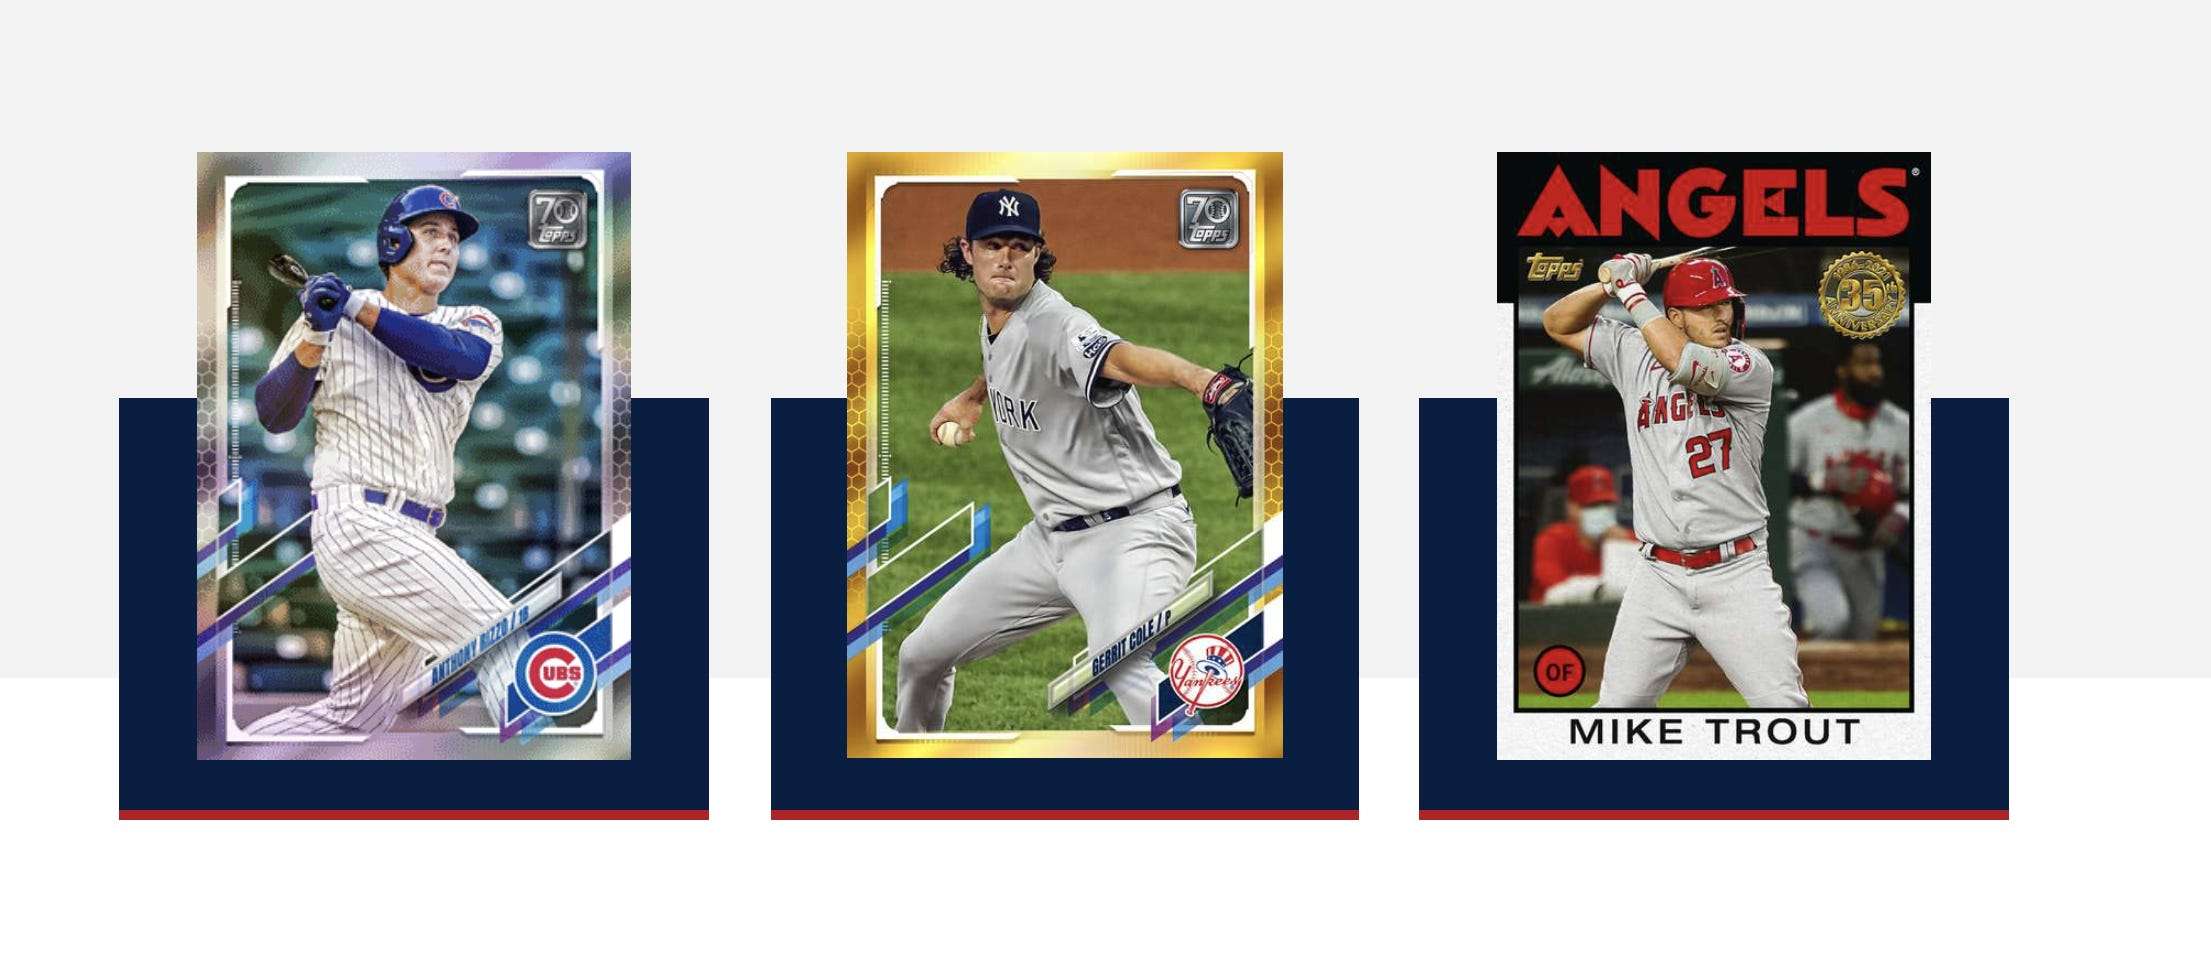 There's a new way to buy and trade official MLB baseball cards. These